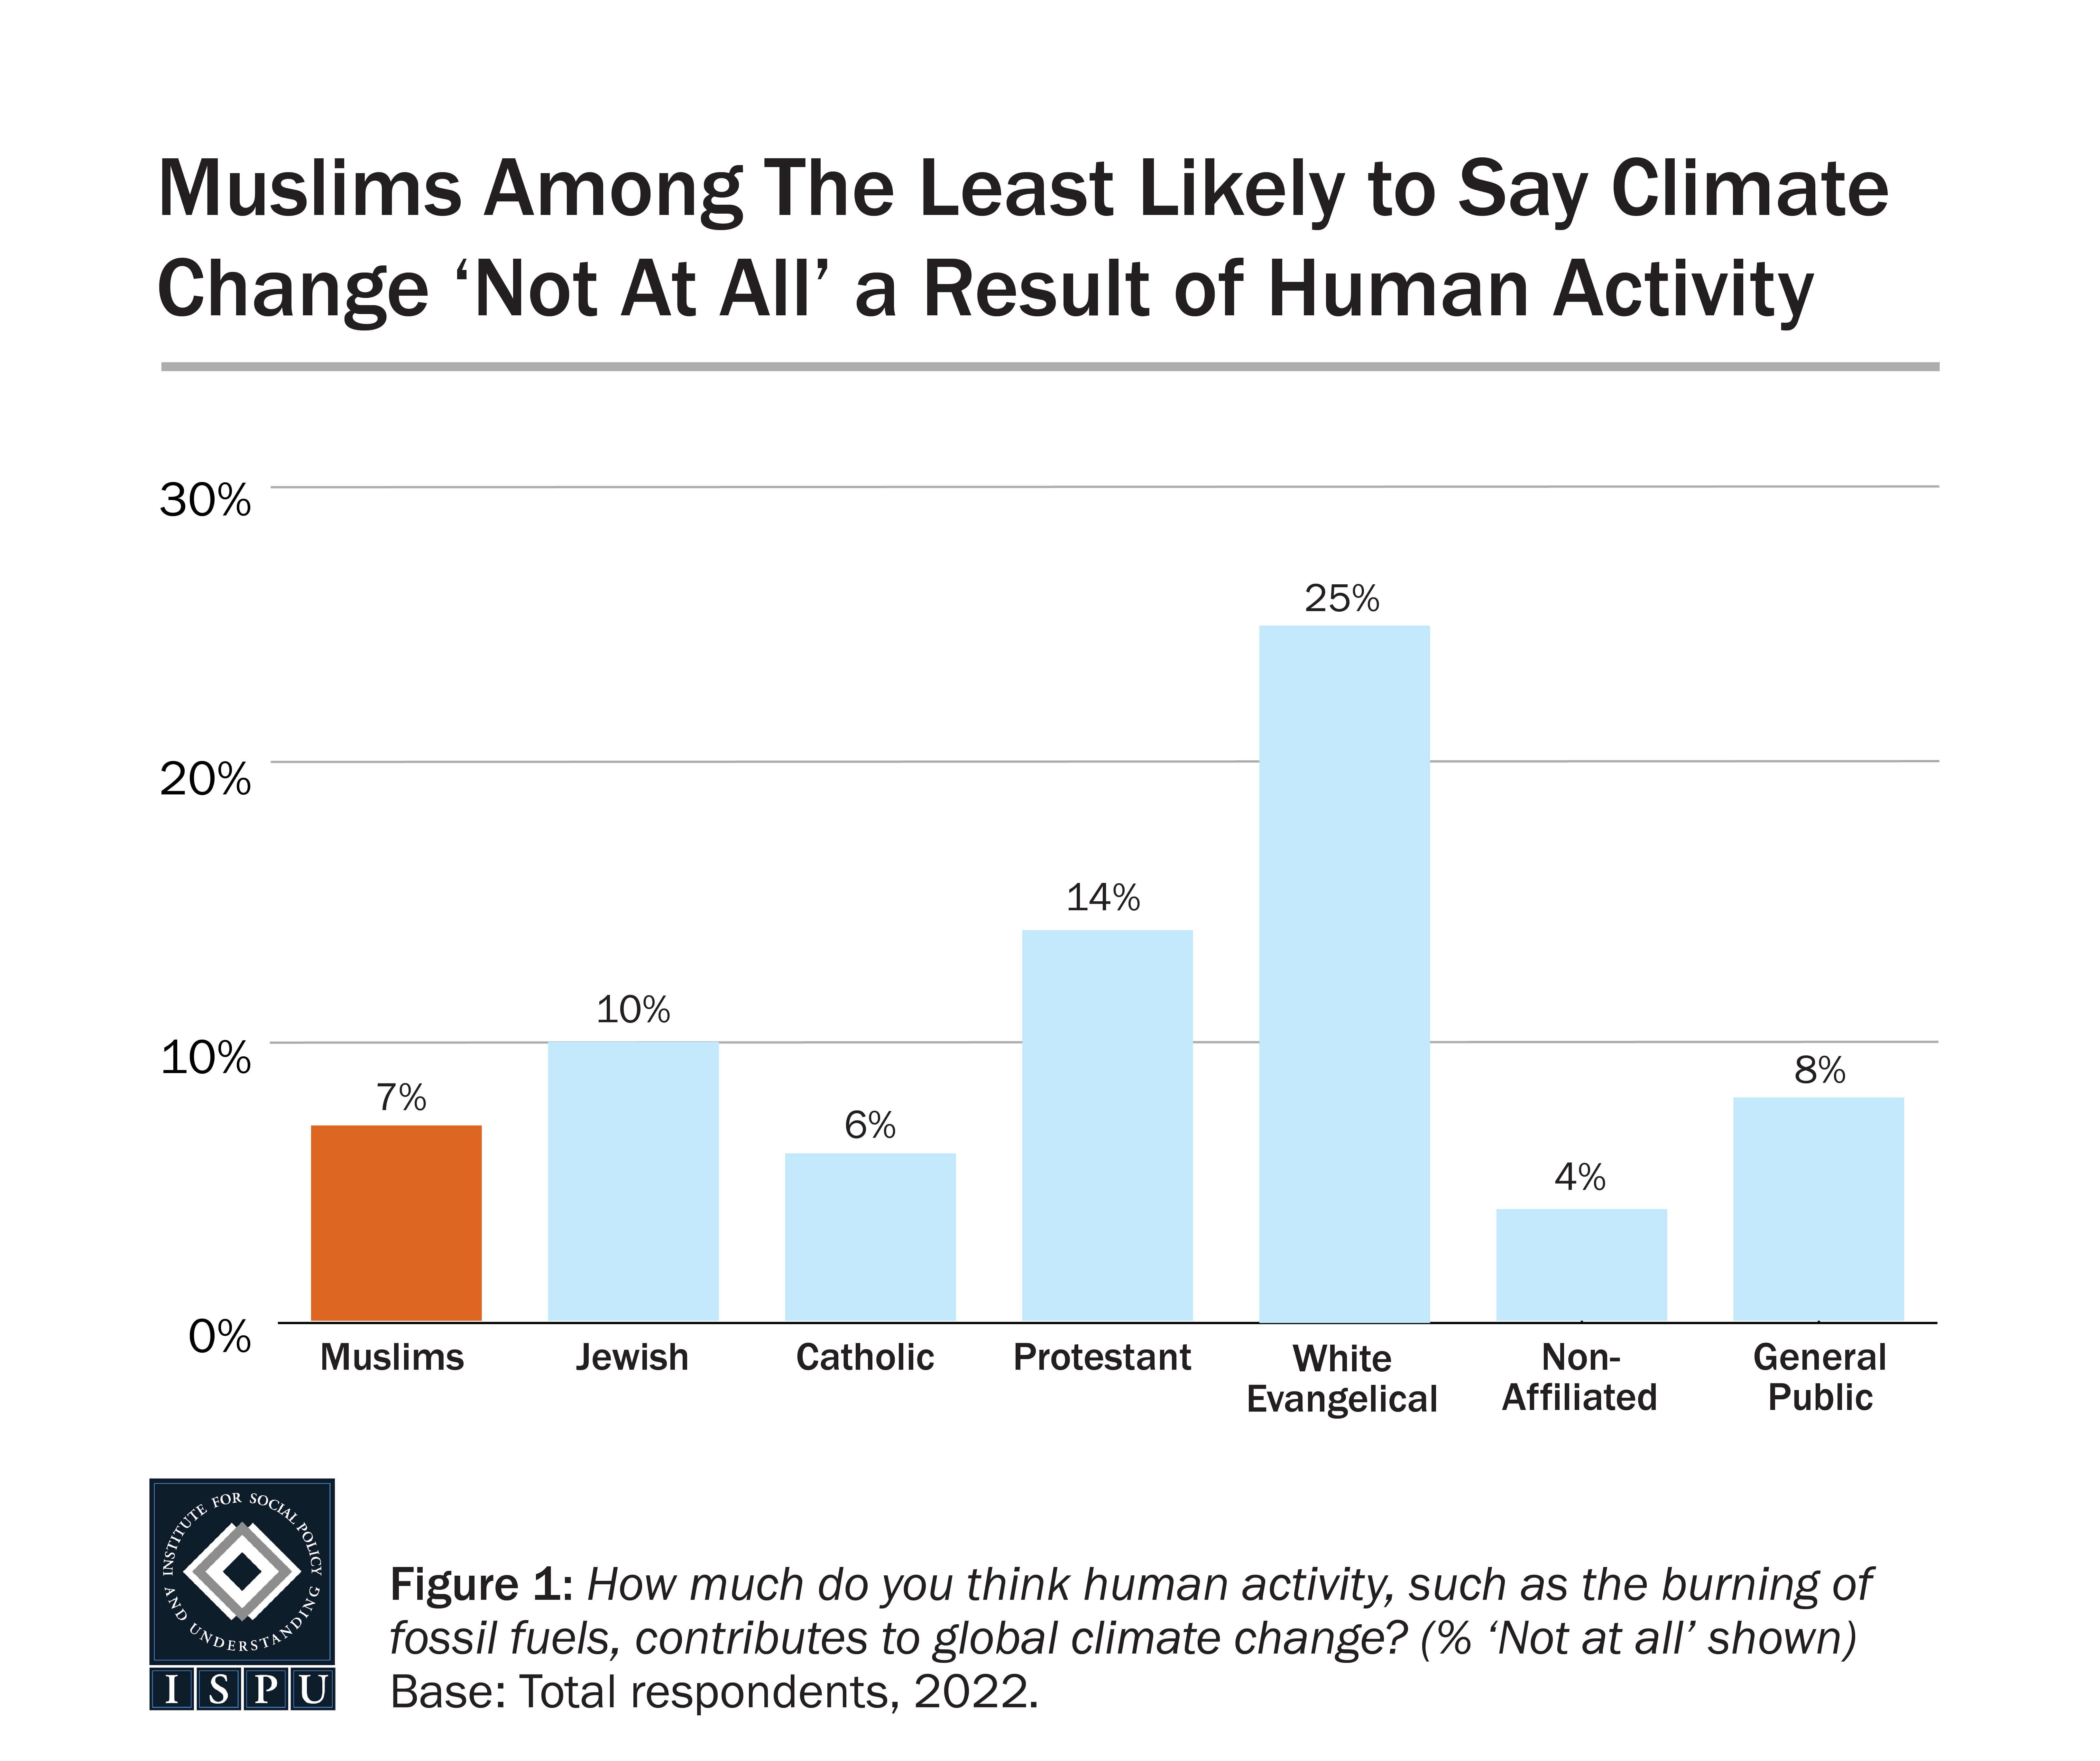 A bar graph showing the proportion of all groups surveyed who attribute climate change “not at all” to human activity.